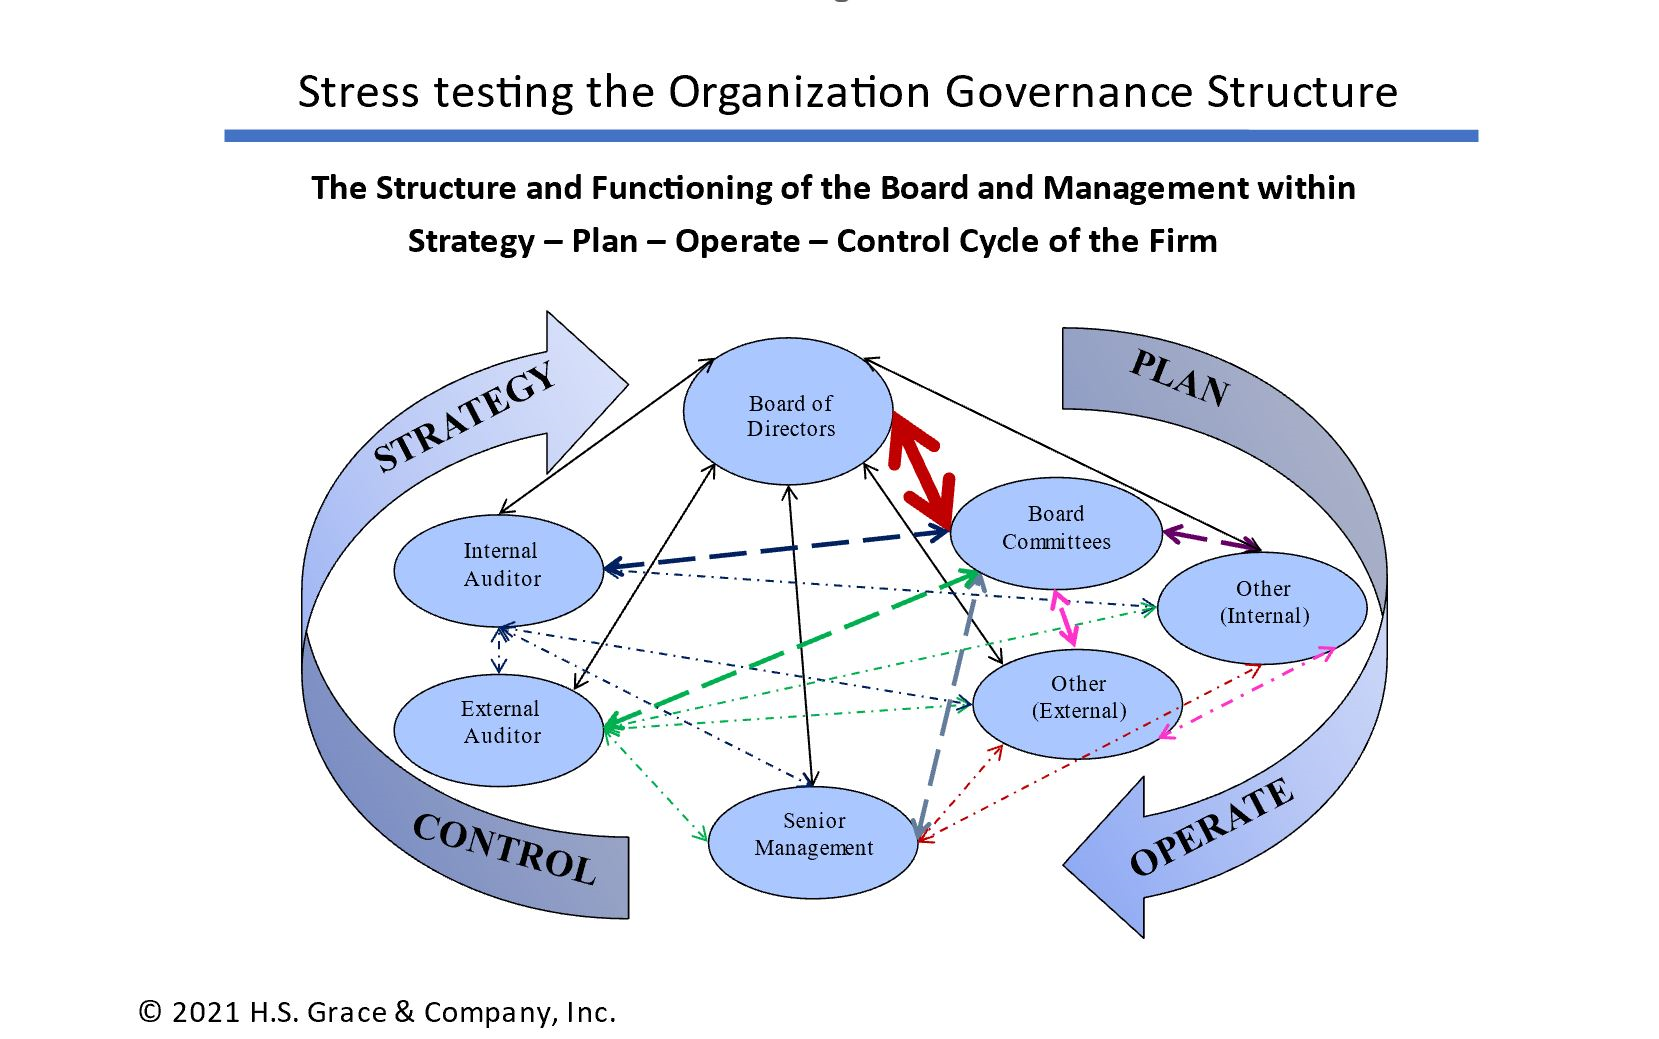 Stress testing the Organization Governance Structure graphic showing strategy, control, plan, and operate around the board, senior management, board committees, internal and external auditors, etc.